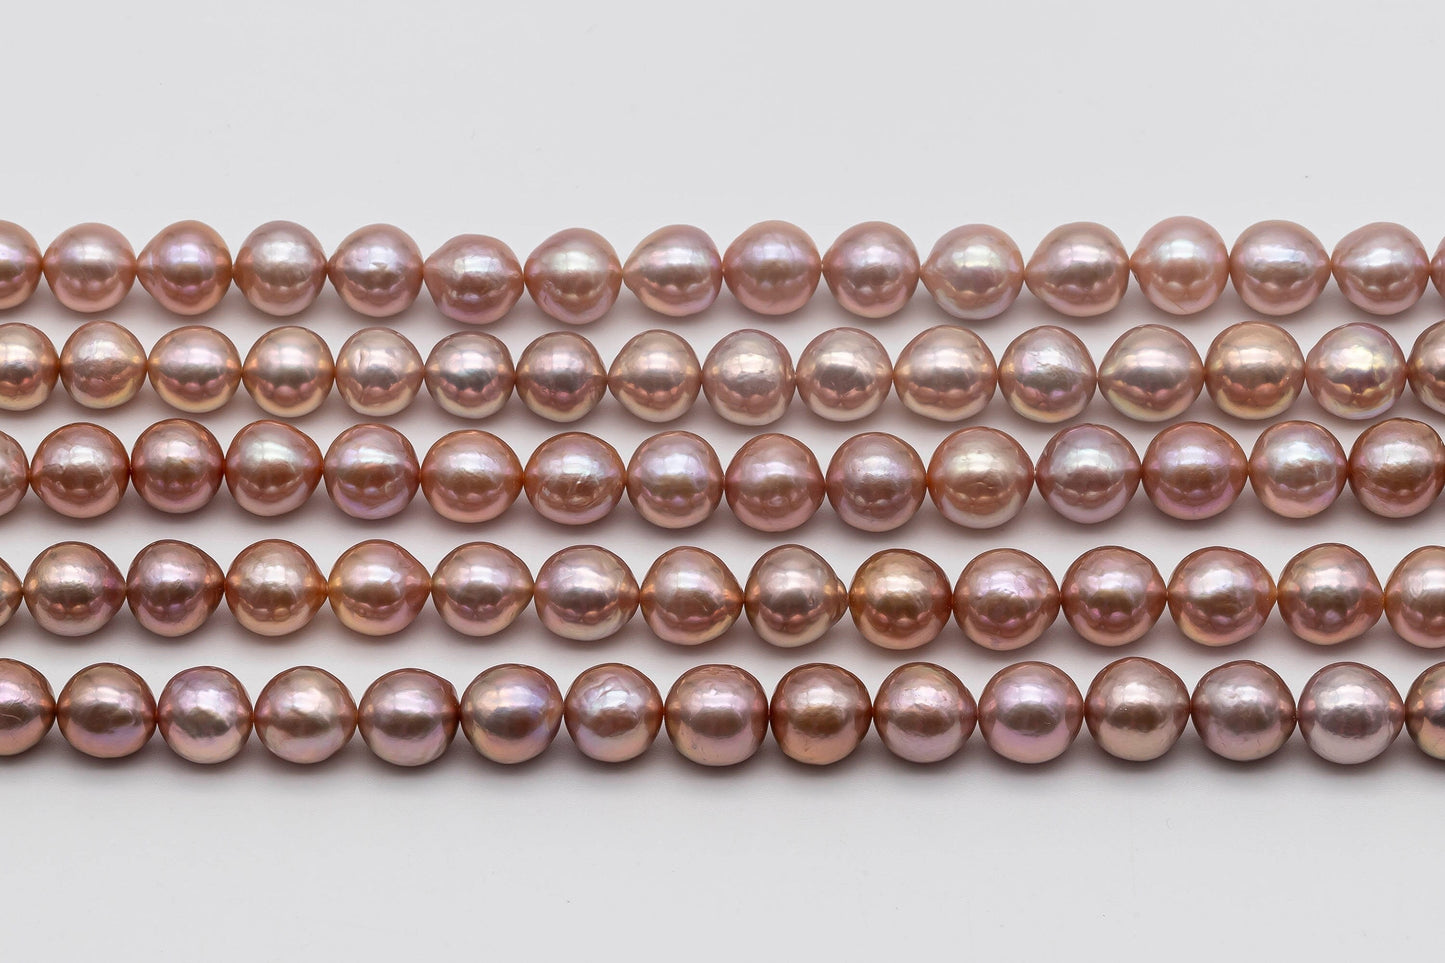 9-11mm Near Round Edison Pearl with Nice Luster in Natural Pink or Lavender in Full Strand for Making Jewelry or Beading, SKU # 1347EP